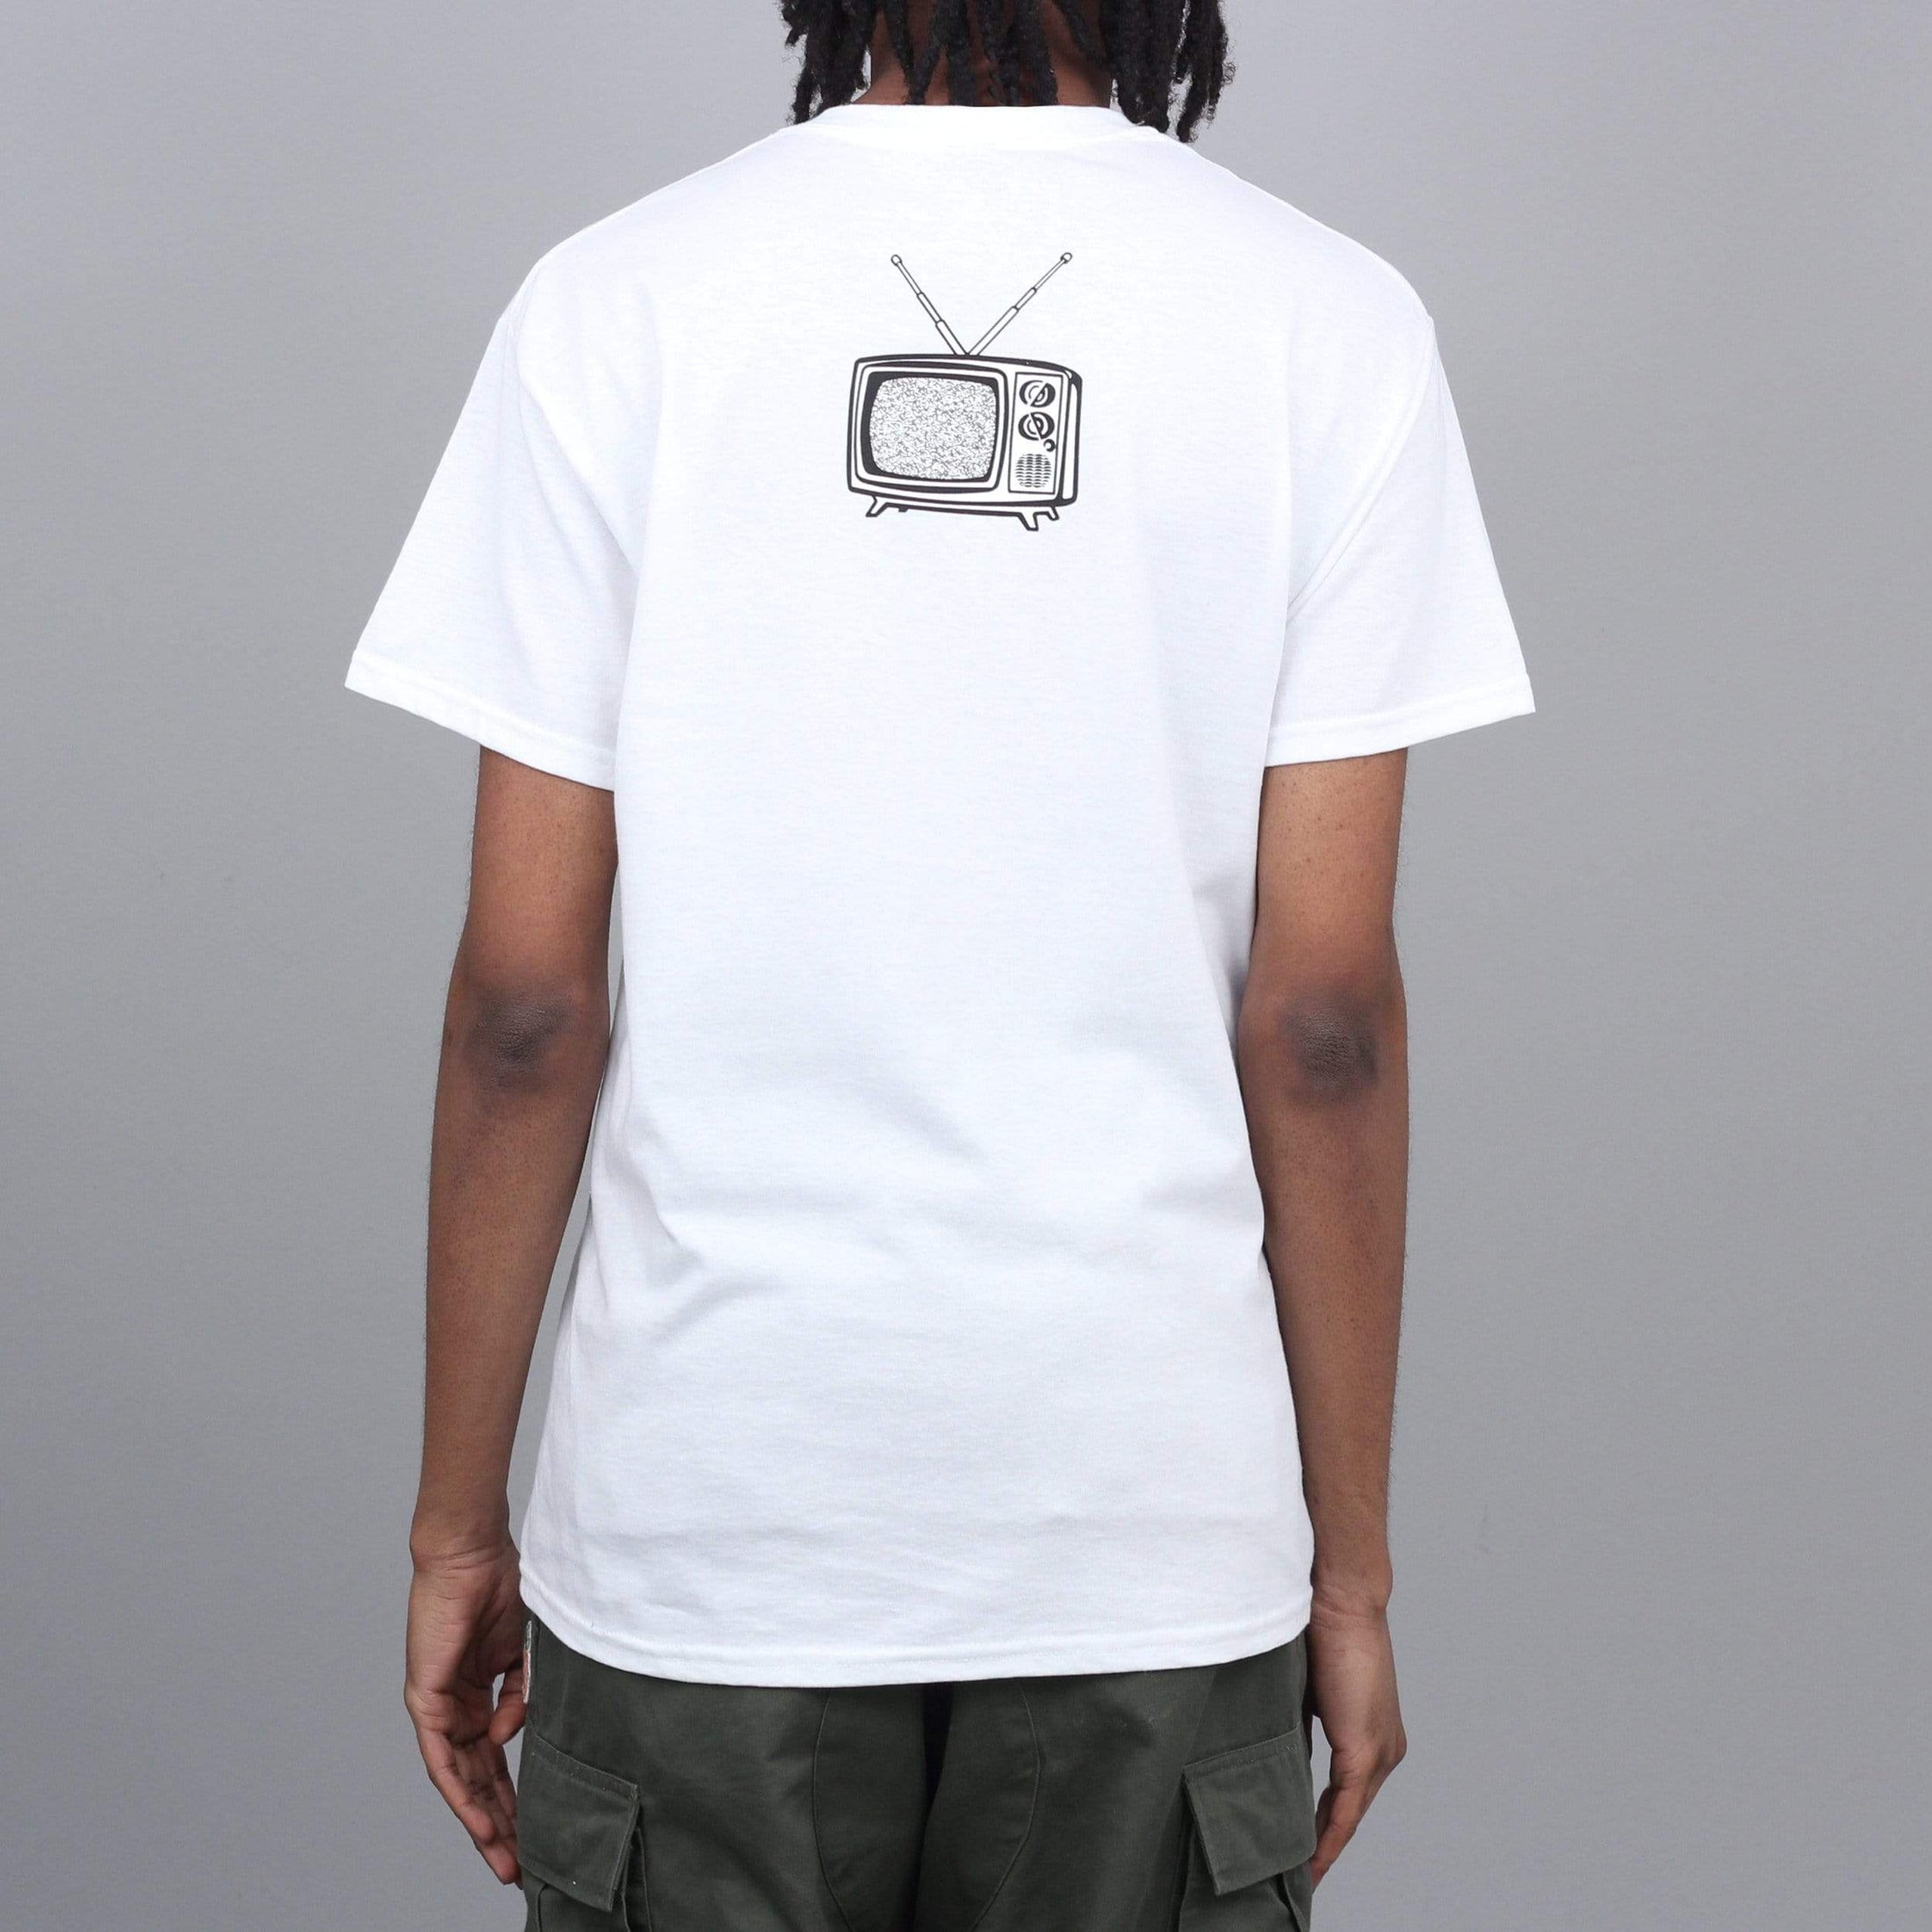 Dear Skating Official Dope T-Shirt White